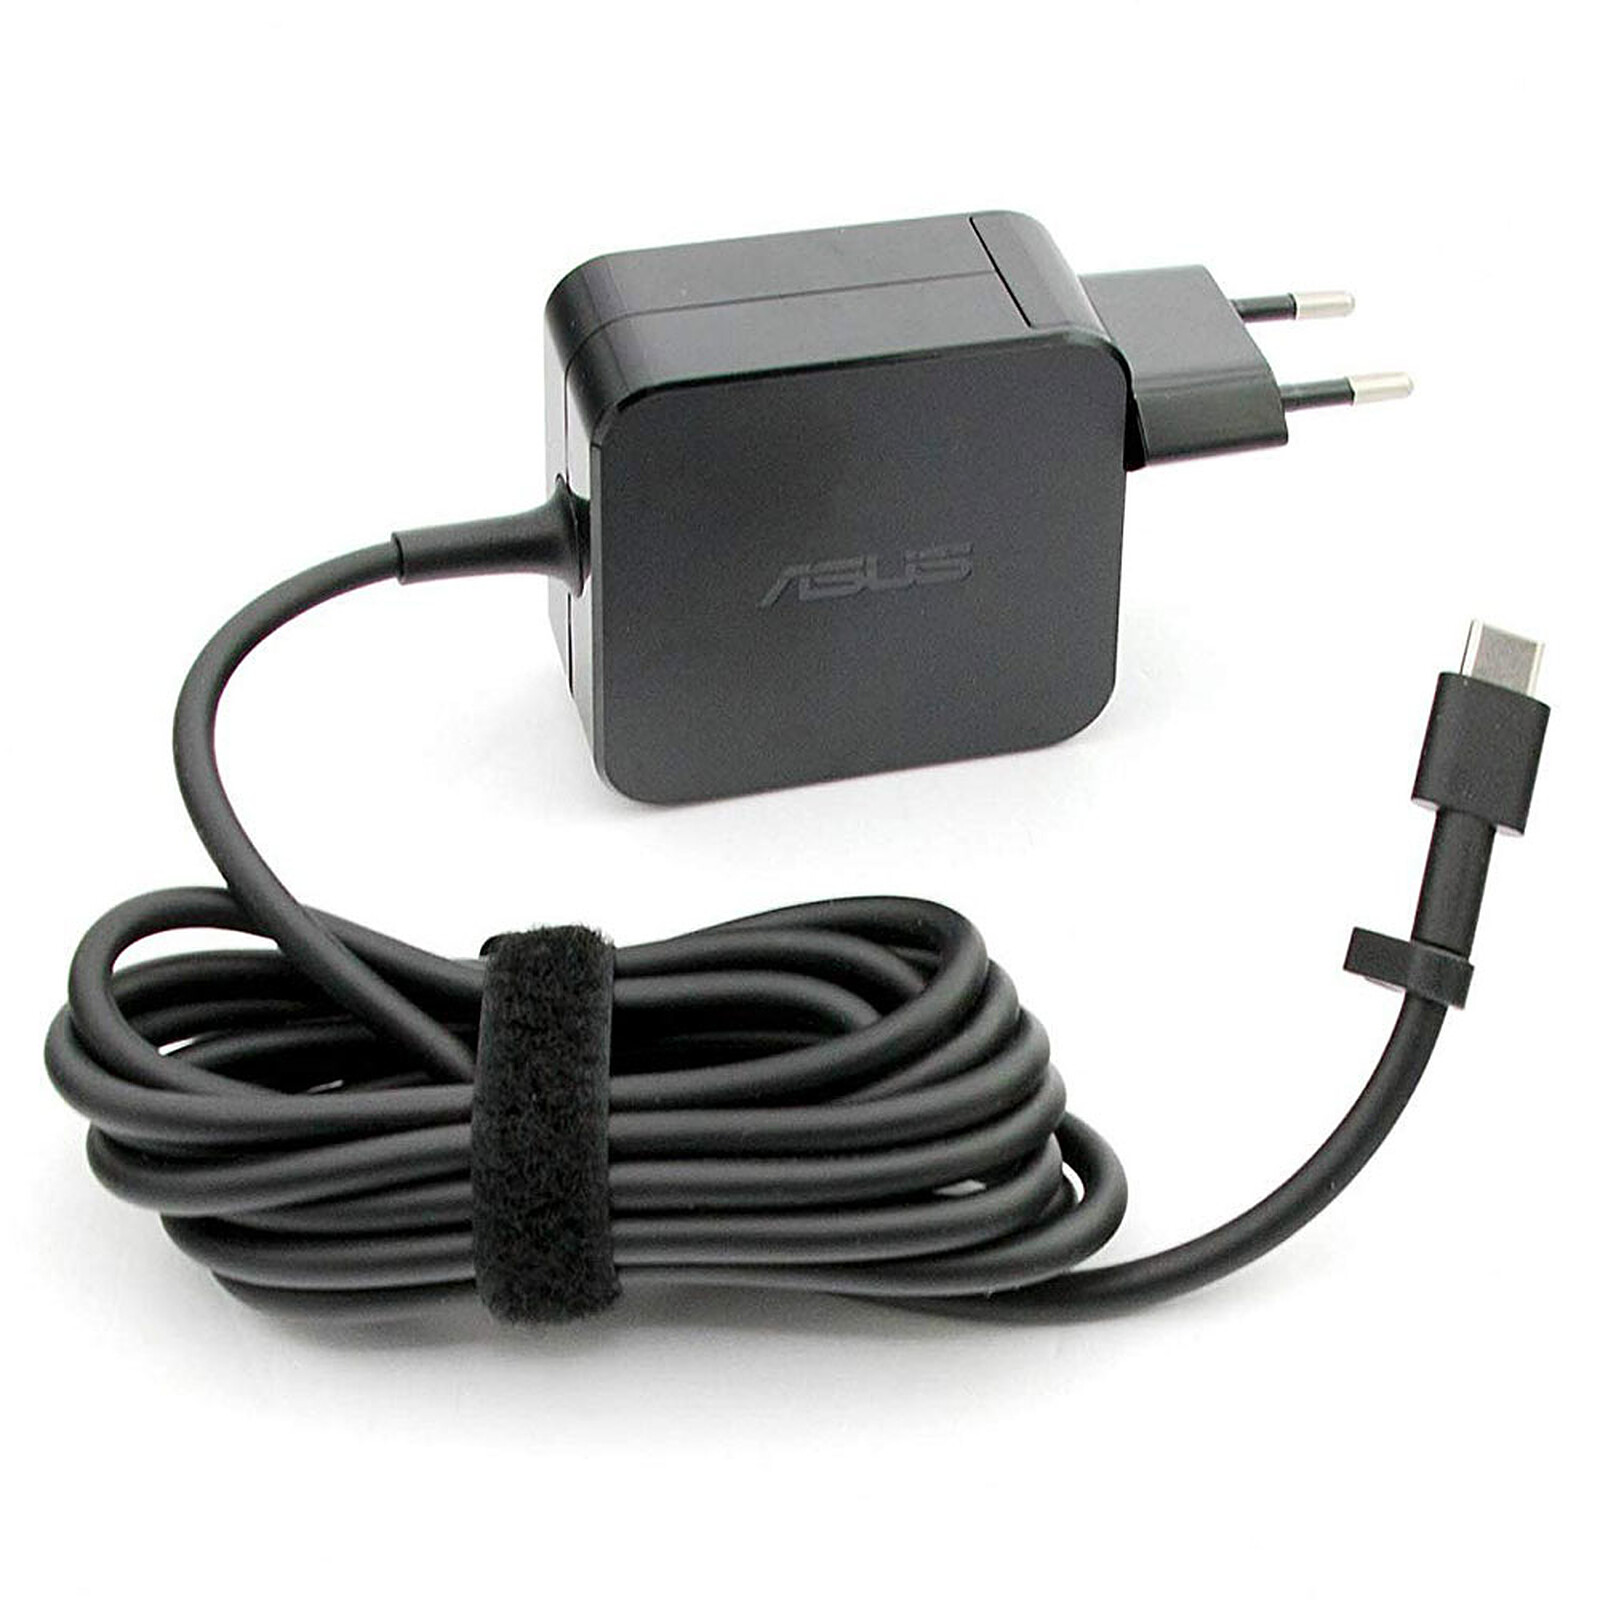 ASUS 65W USB-C Power - charger ASUS LDLC | Holy Moley